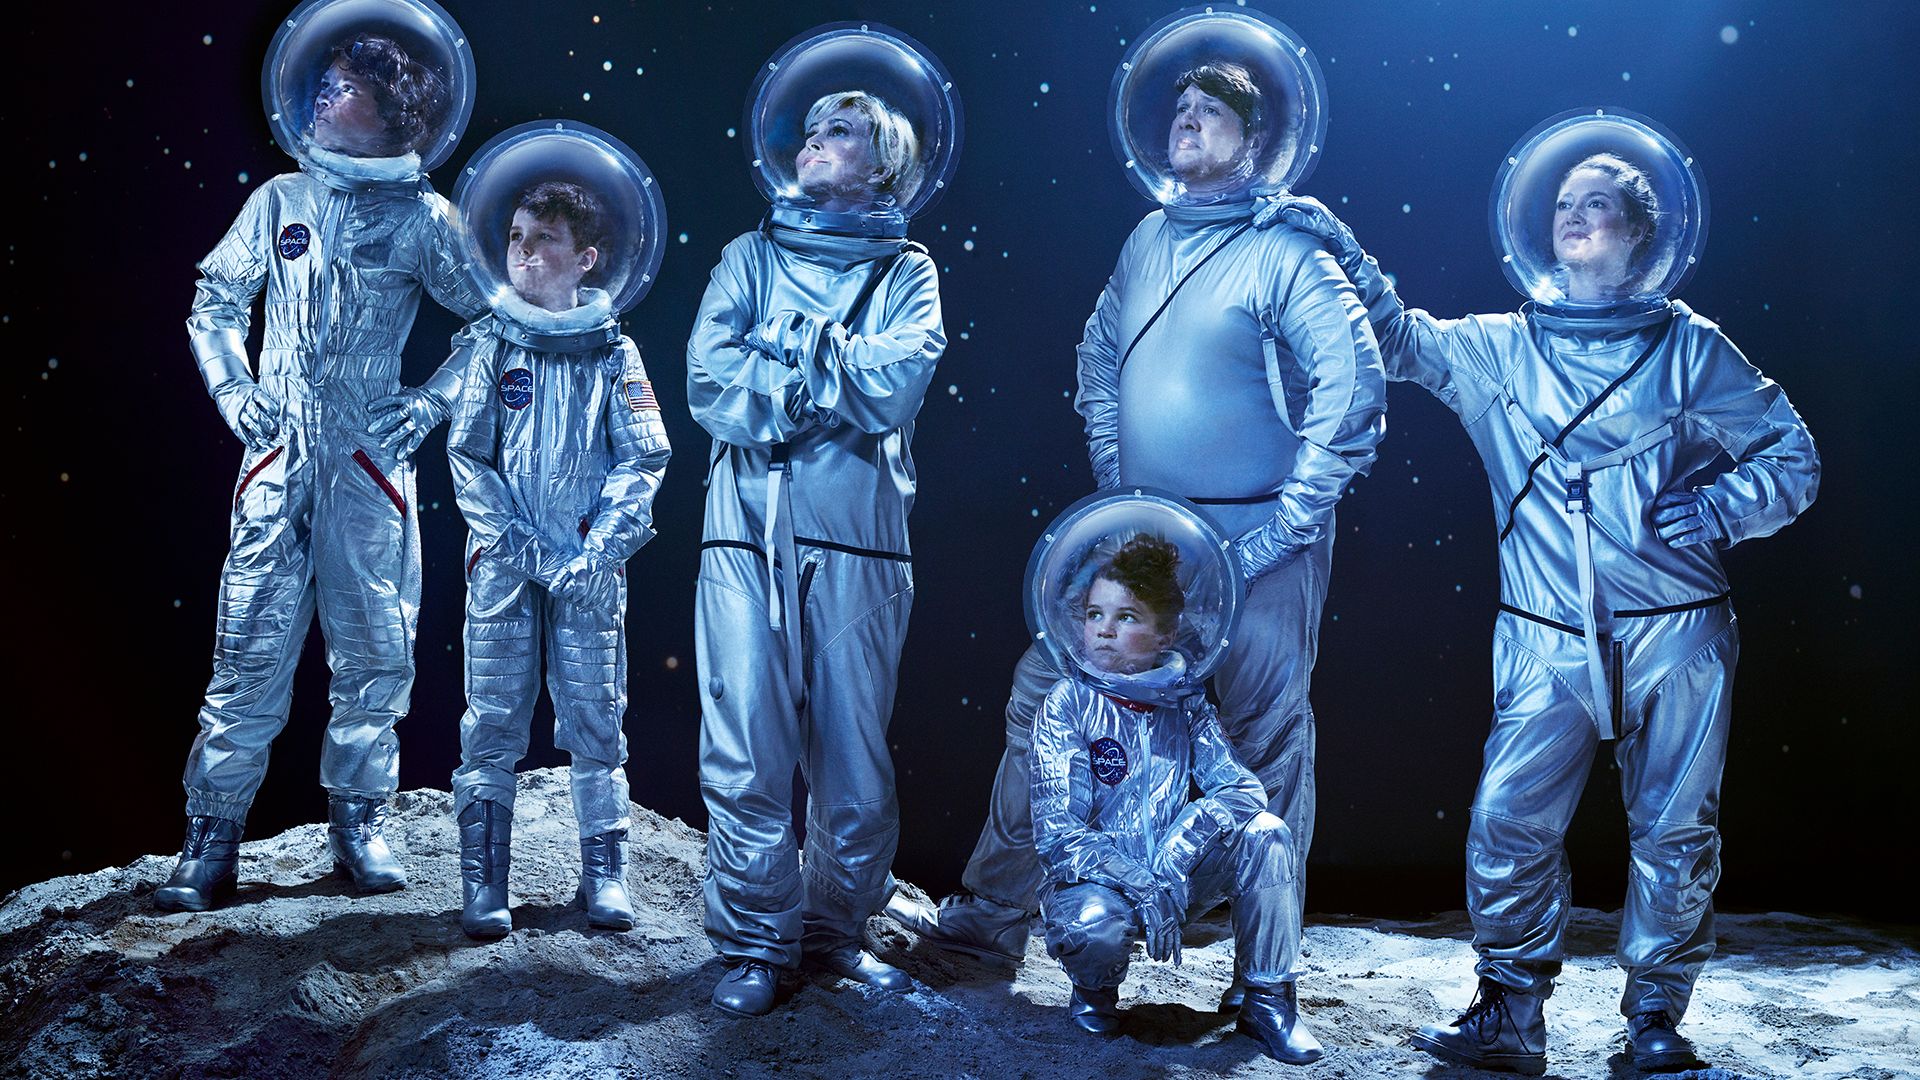 The cast of Young Sheldon wears space suits and stands on a rocky moonscape.